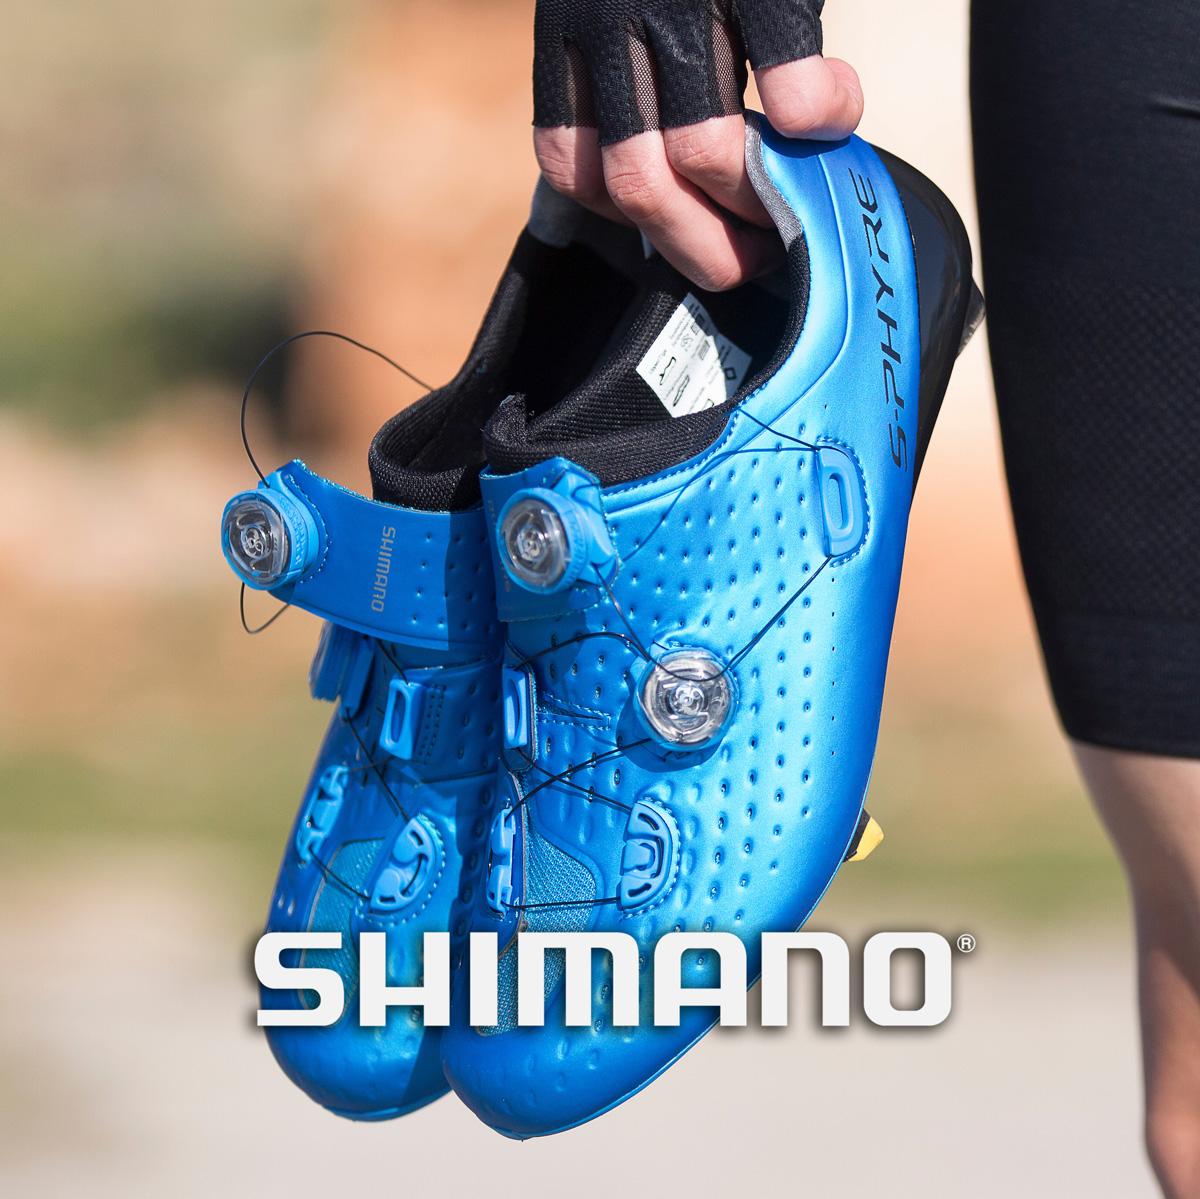 Shimano Shoe Size Chart Hit the road with the right sized cycling shoes